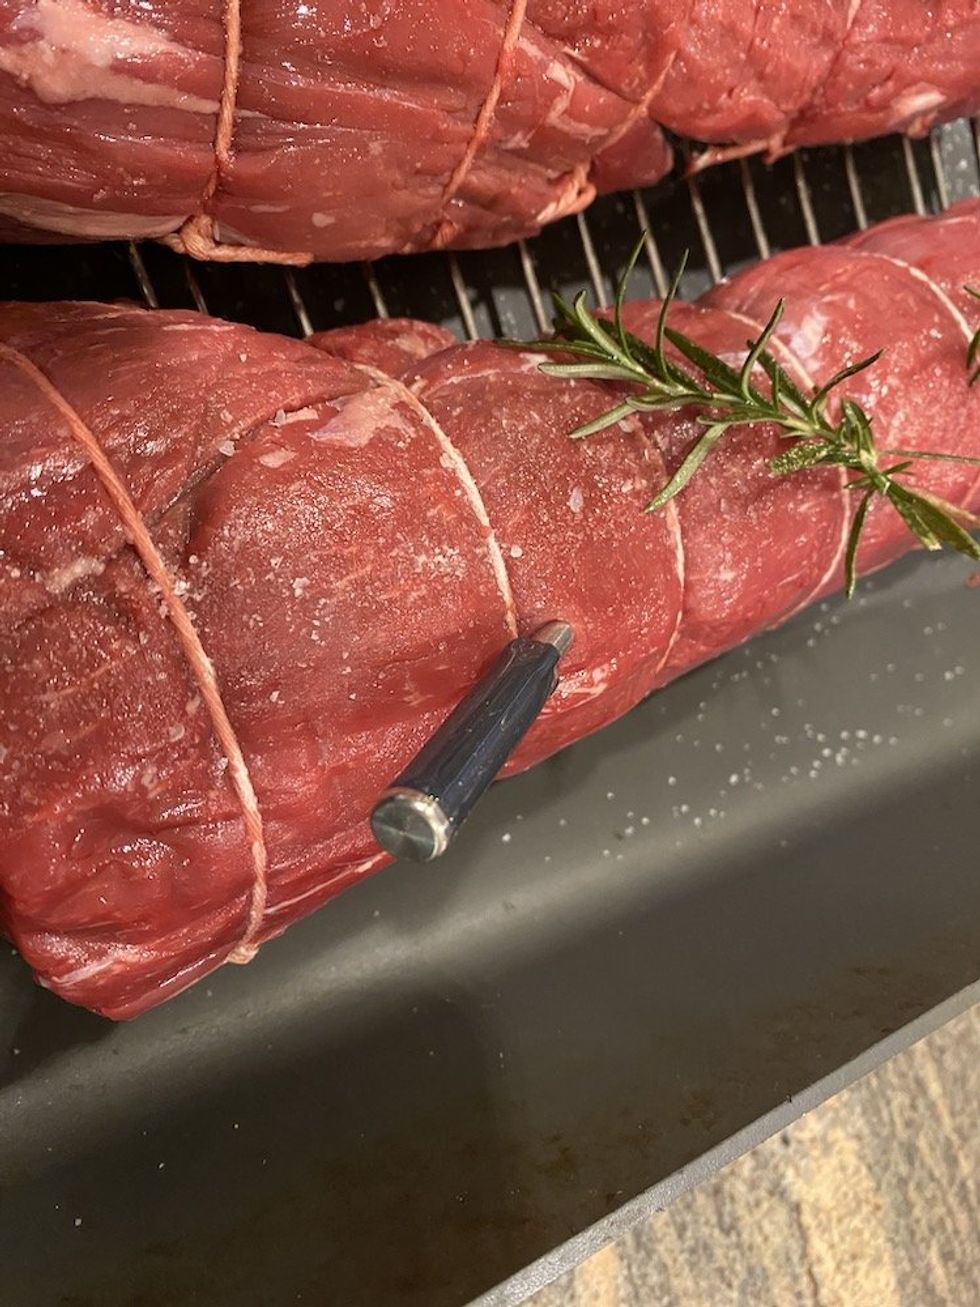 a photo of a smart meat thermometer inserted in a roast beef which is in a pan.